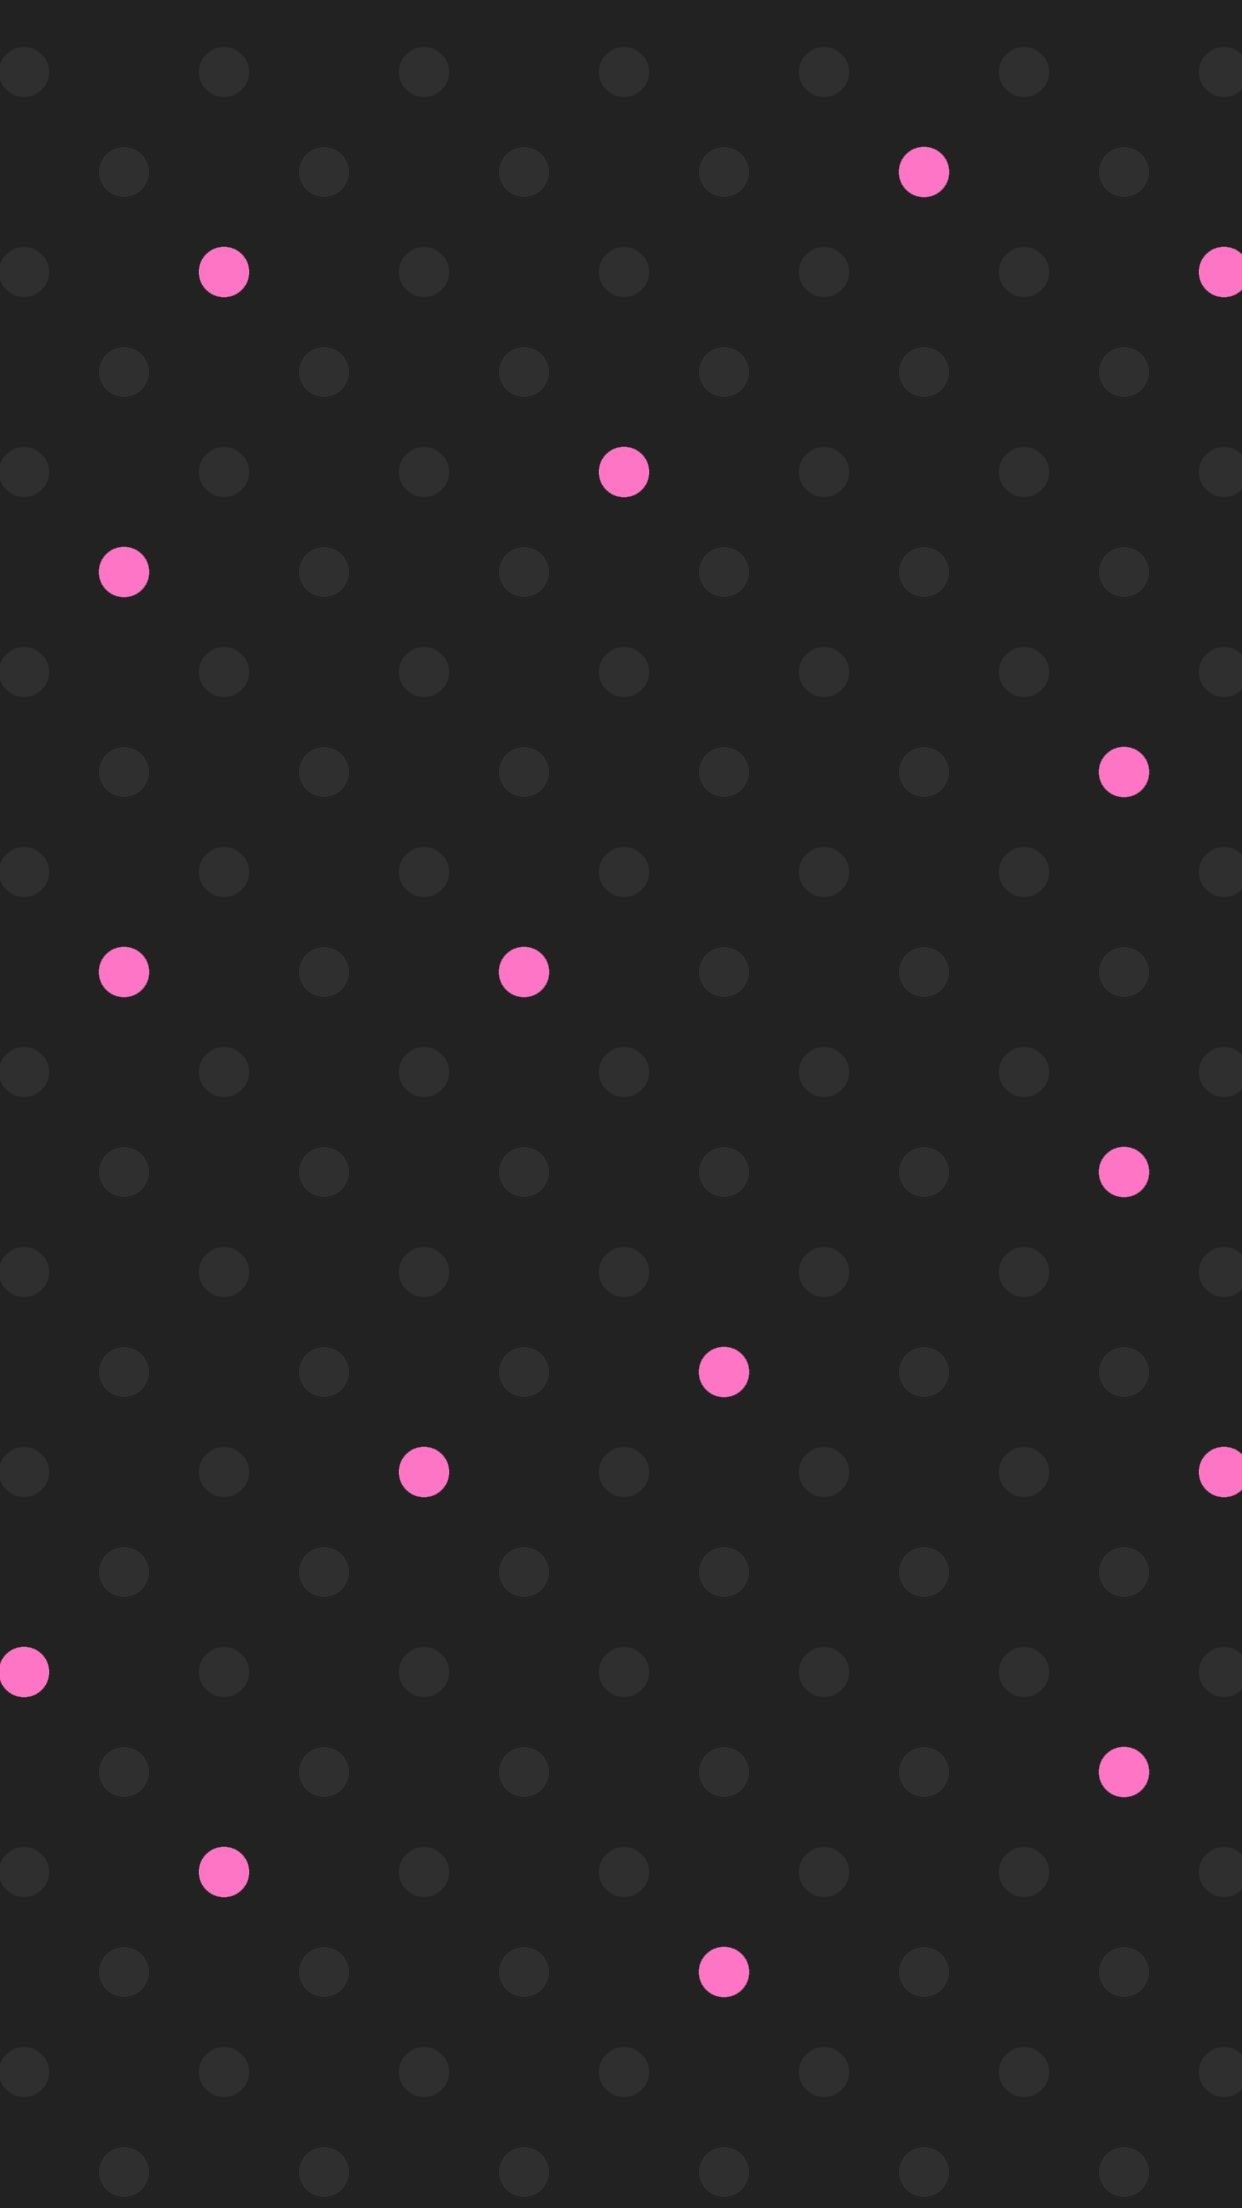 1242x2208 Wallpaper, background, iPhone, Android, HD, black, dark, pink